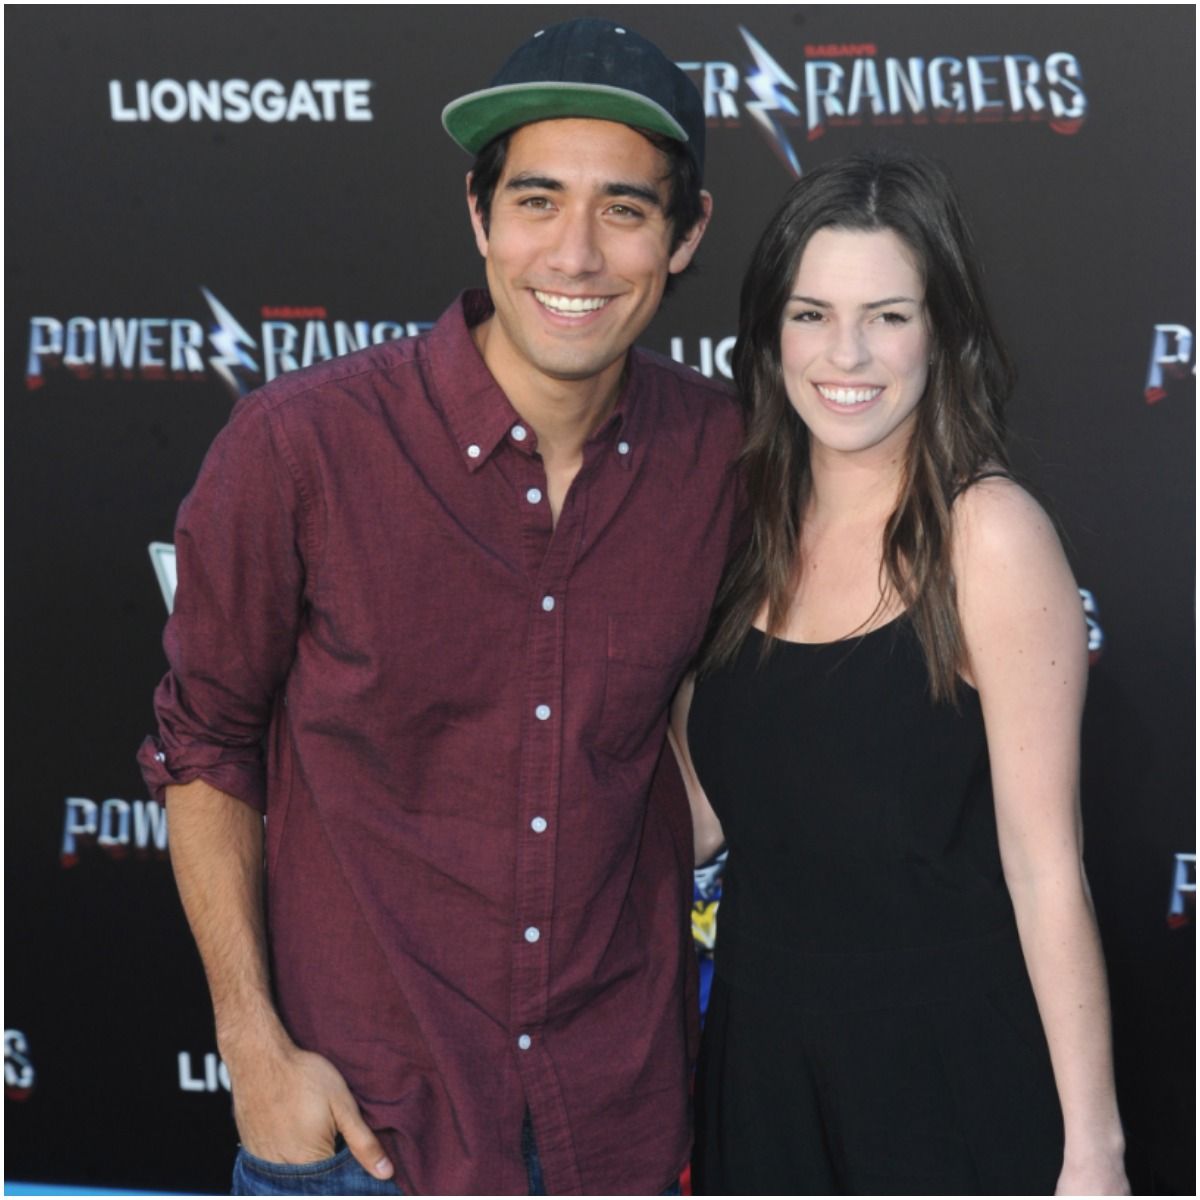 Zach King and his wife Rachel Holm